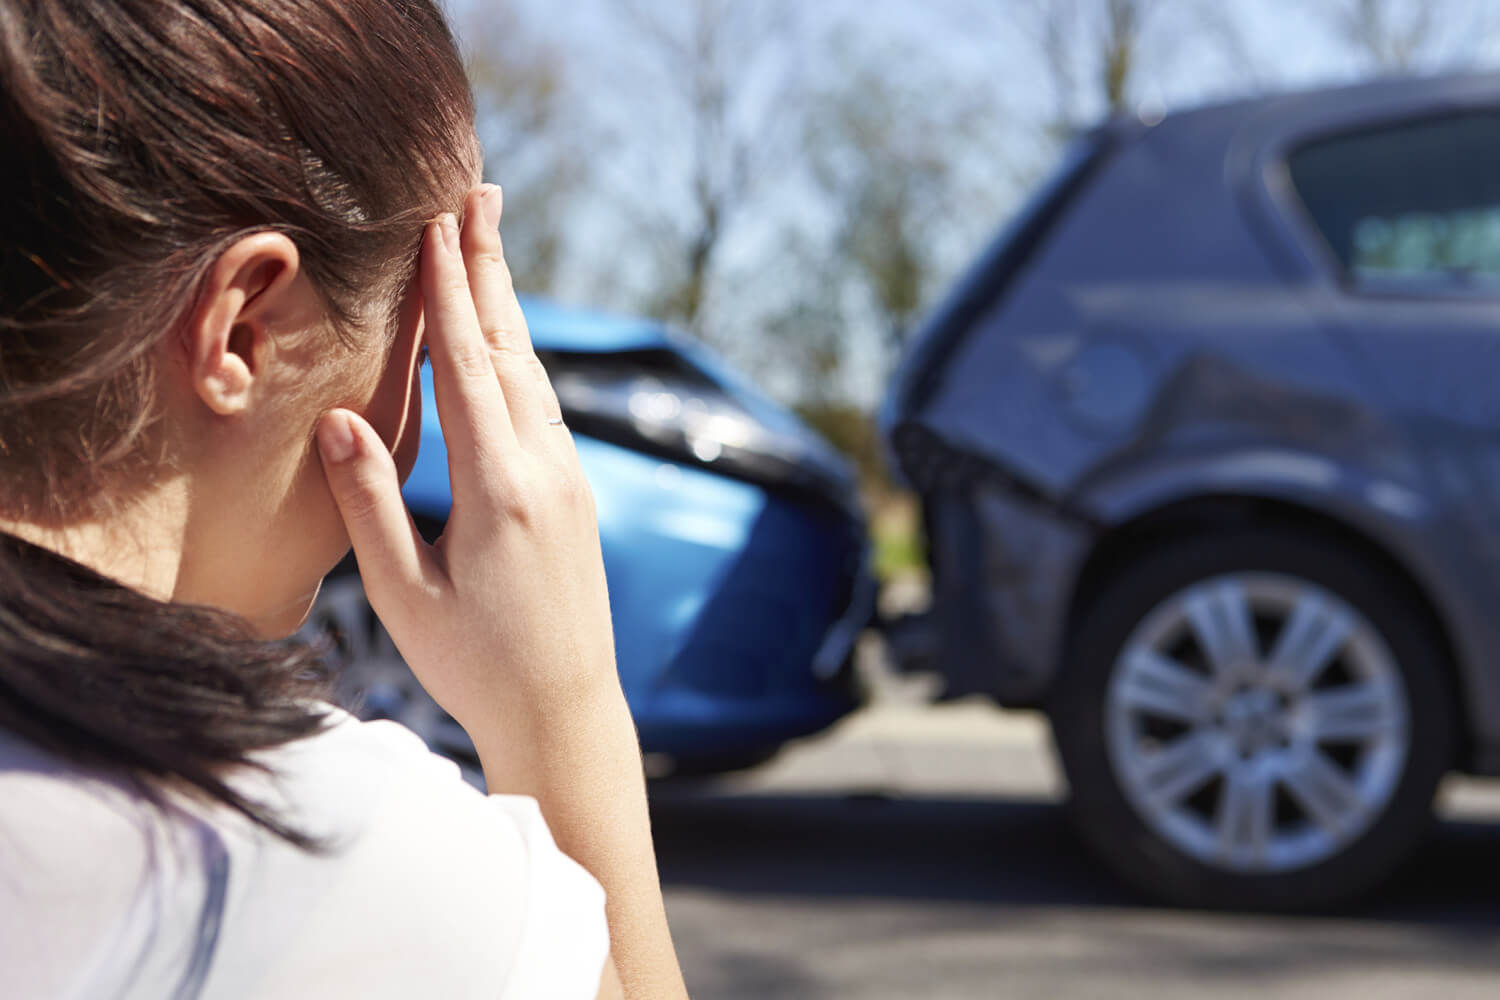 Finding a Good Grand Junction Auto Accident Lawyer